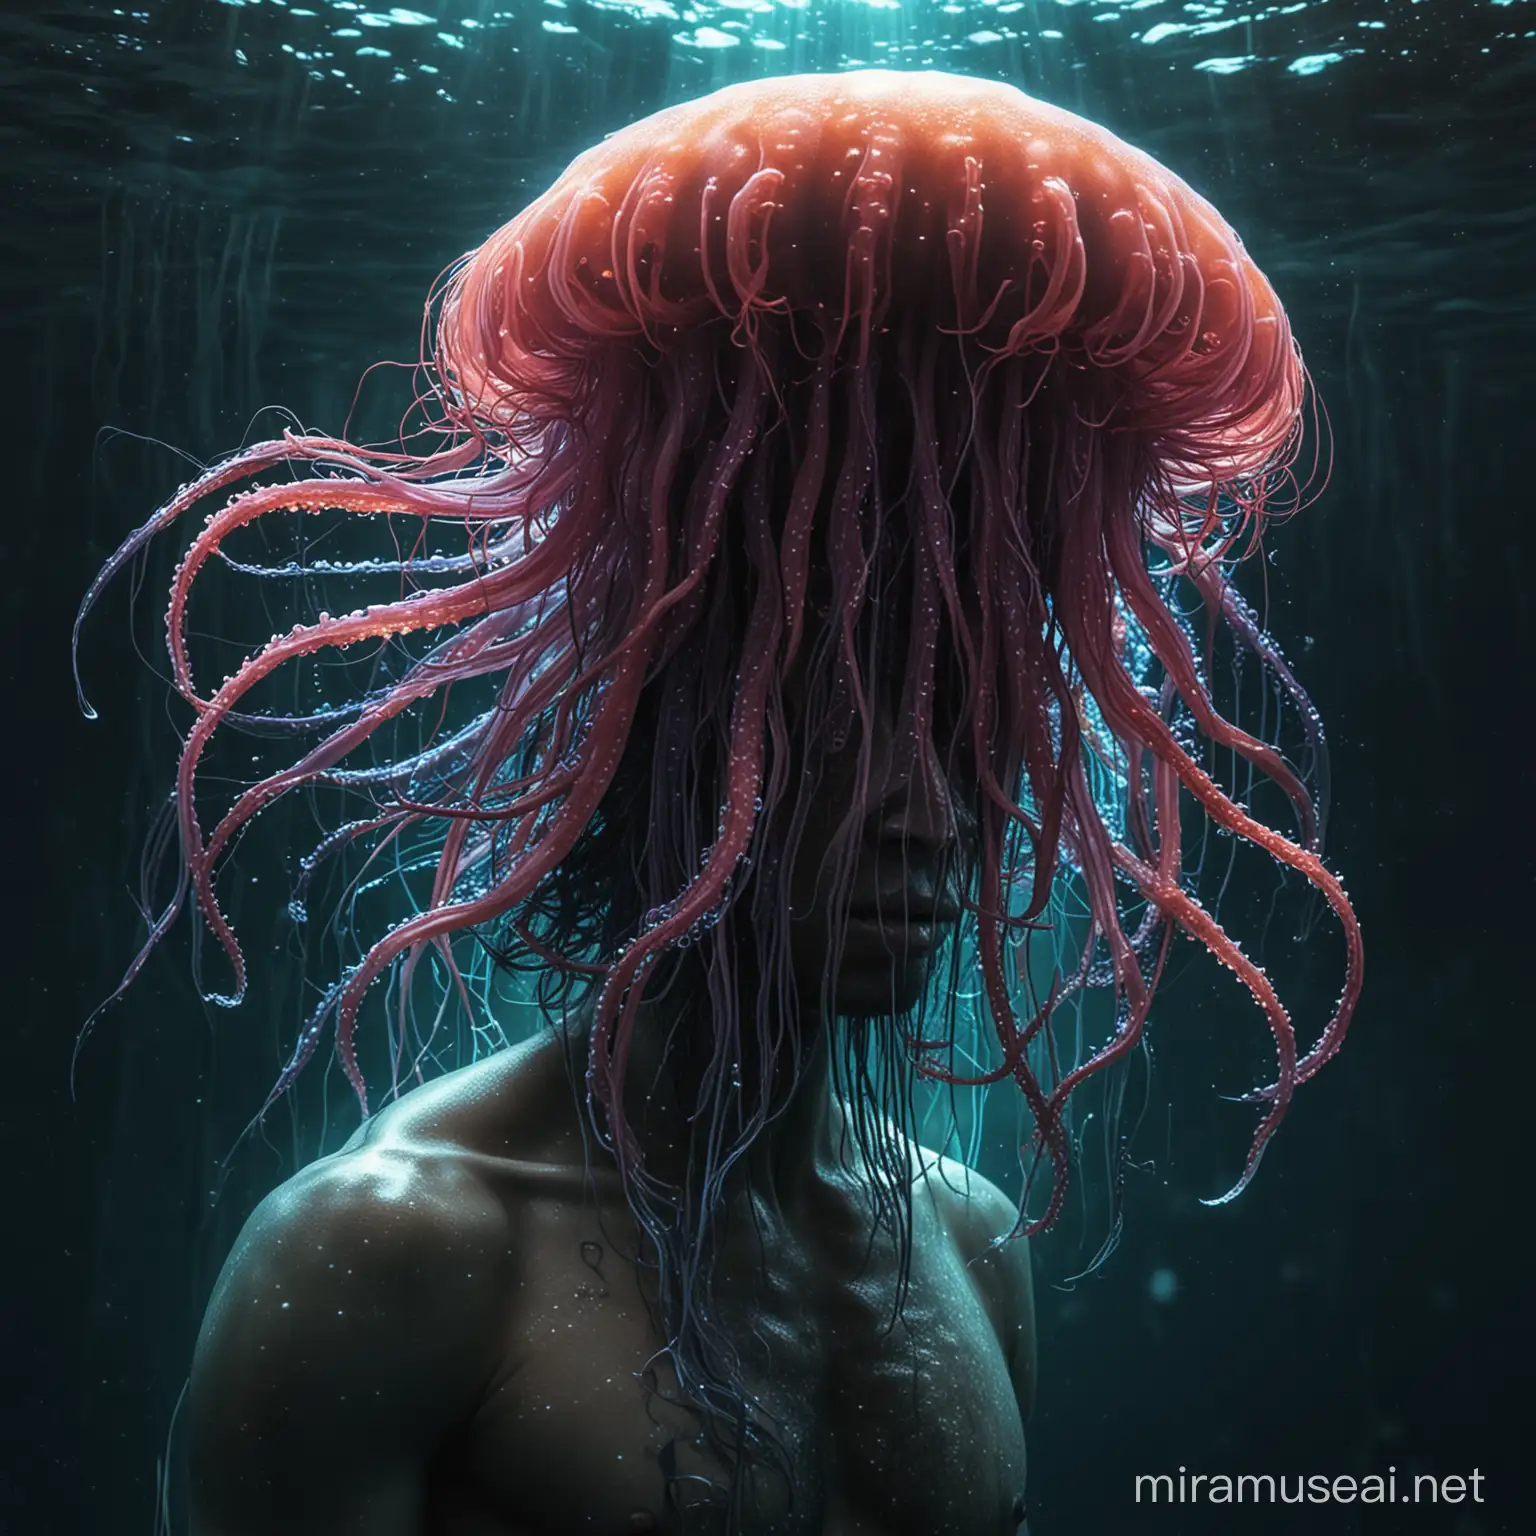 <mymodel>Evil Merman

Jellyfish with long swirling tentacles, fitted on a persons head, avatar, underwater theme, high quality, digital art, vibrant colors, glowing tentacles, detailed texture, surreal, ethereal lighting from the right